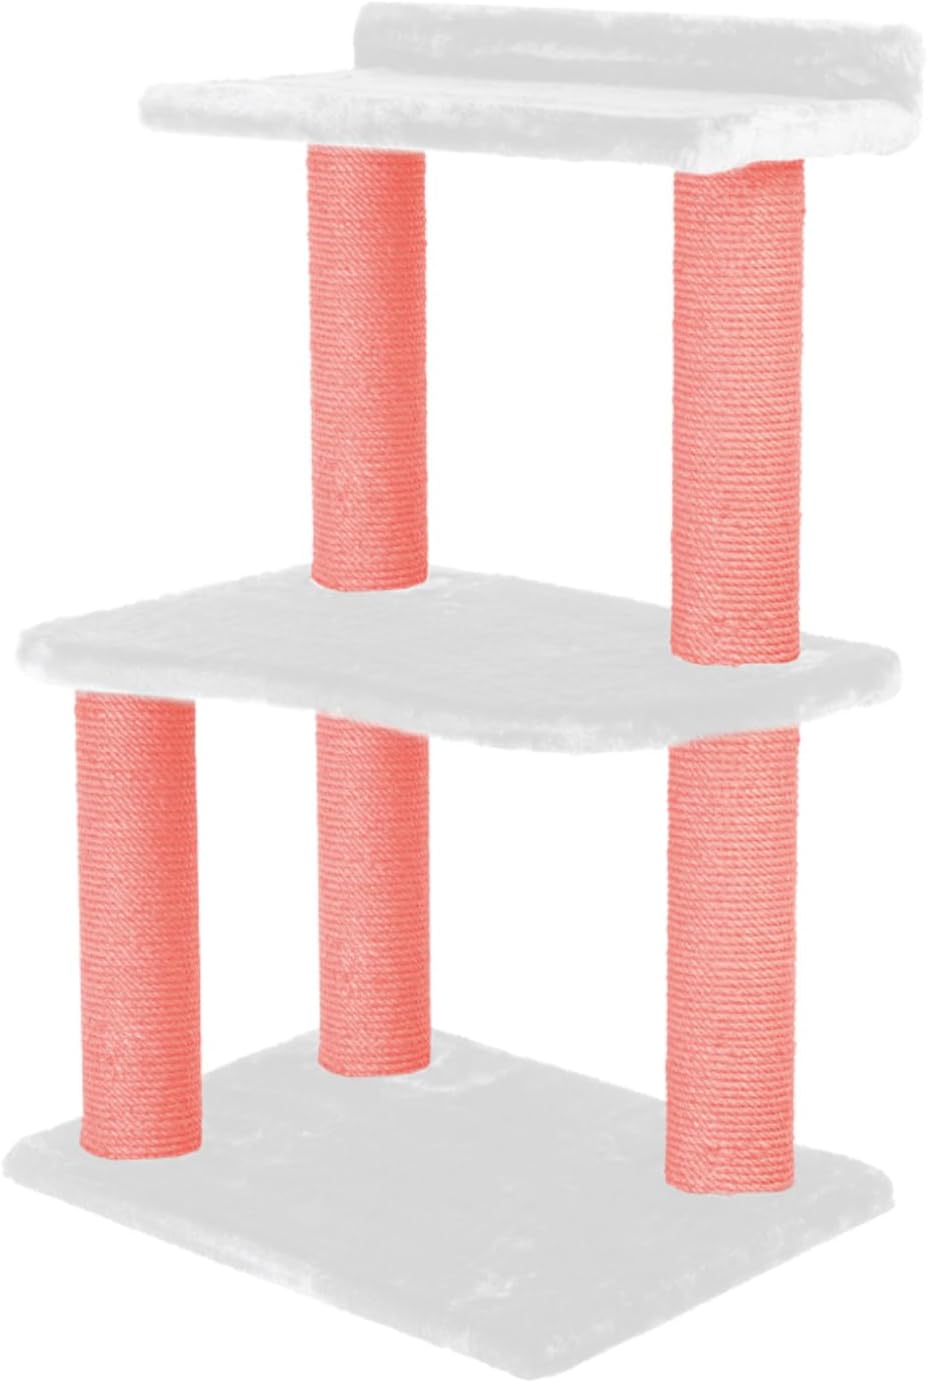 34 Inch Classic Comfort for Indoor Modern Premium Cats and Kittens Scratching Tower Larger Base for Better Stability, (White/Pink)